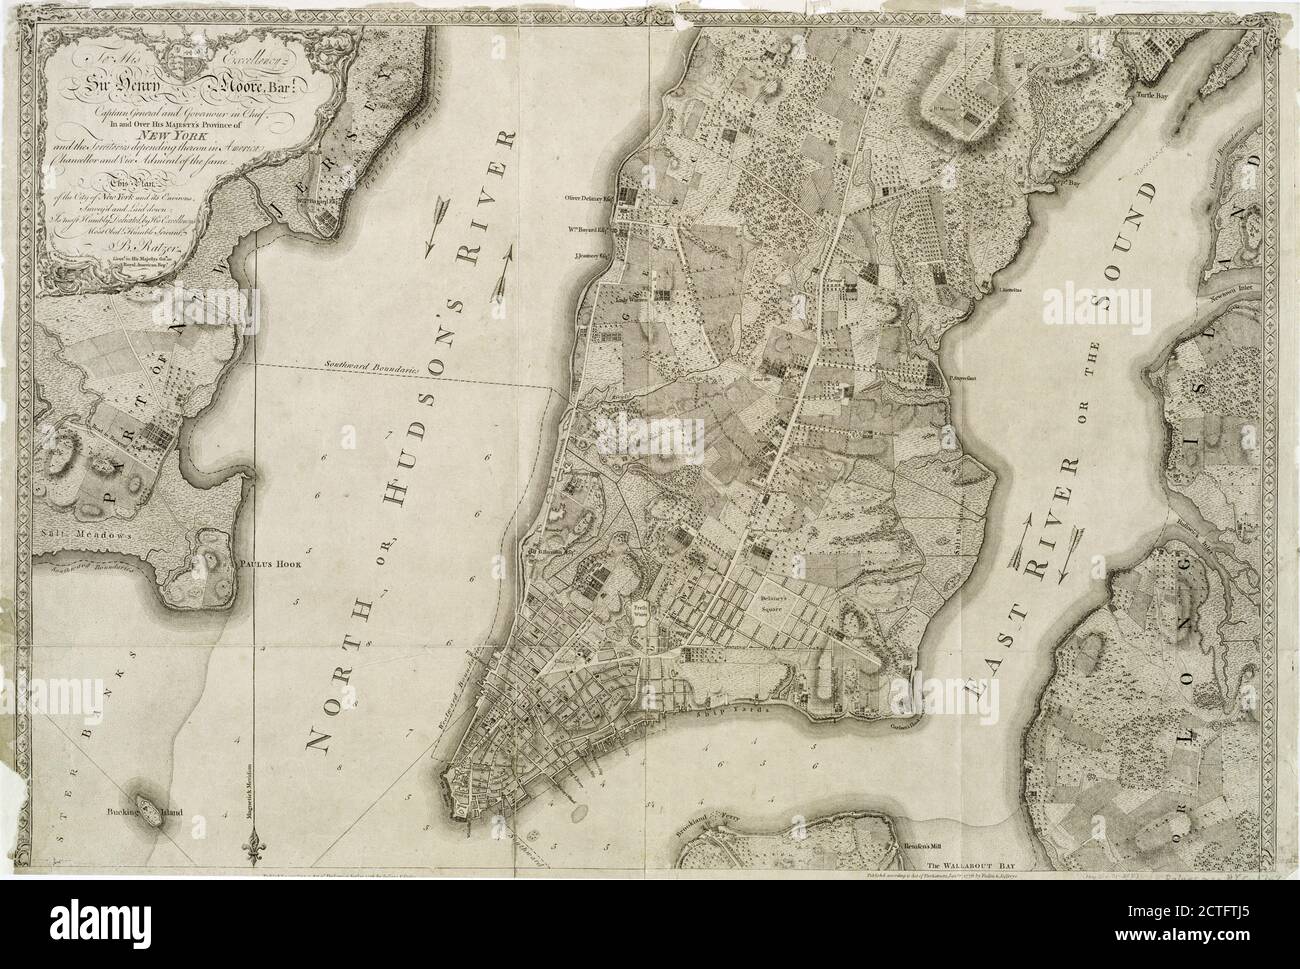 Plan of the city of New York in North America : surveyed in the years 1766 & 1767, still image, Maps, 1776-01-12, Faden, William (1750?-1836), Kitchin, Thomas (d. 1784), Ratzer, Bernard Stock Photo